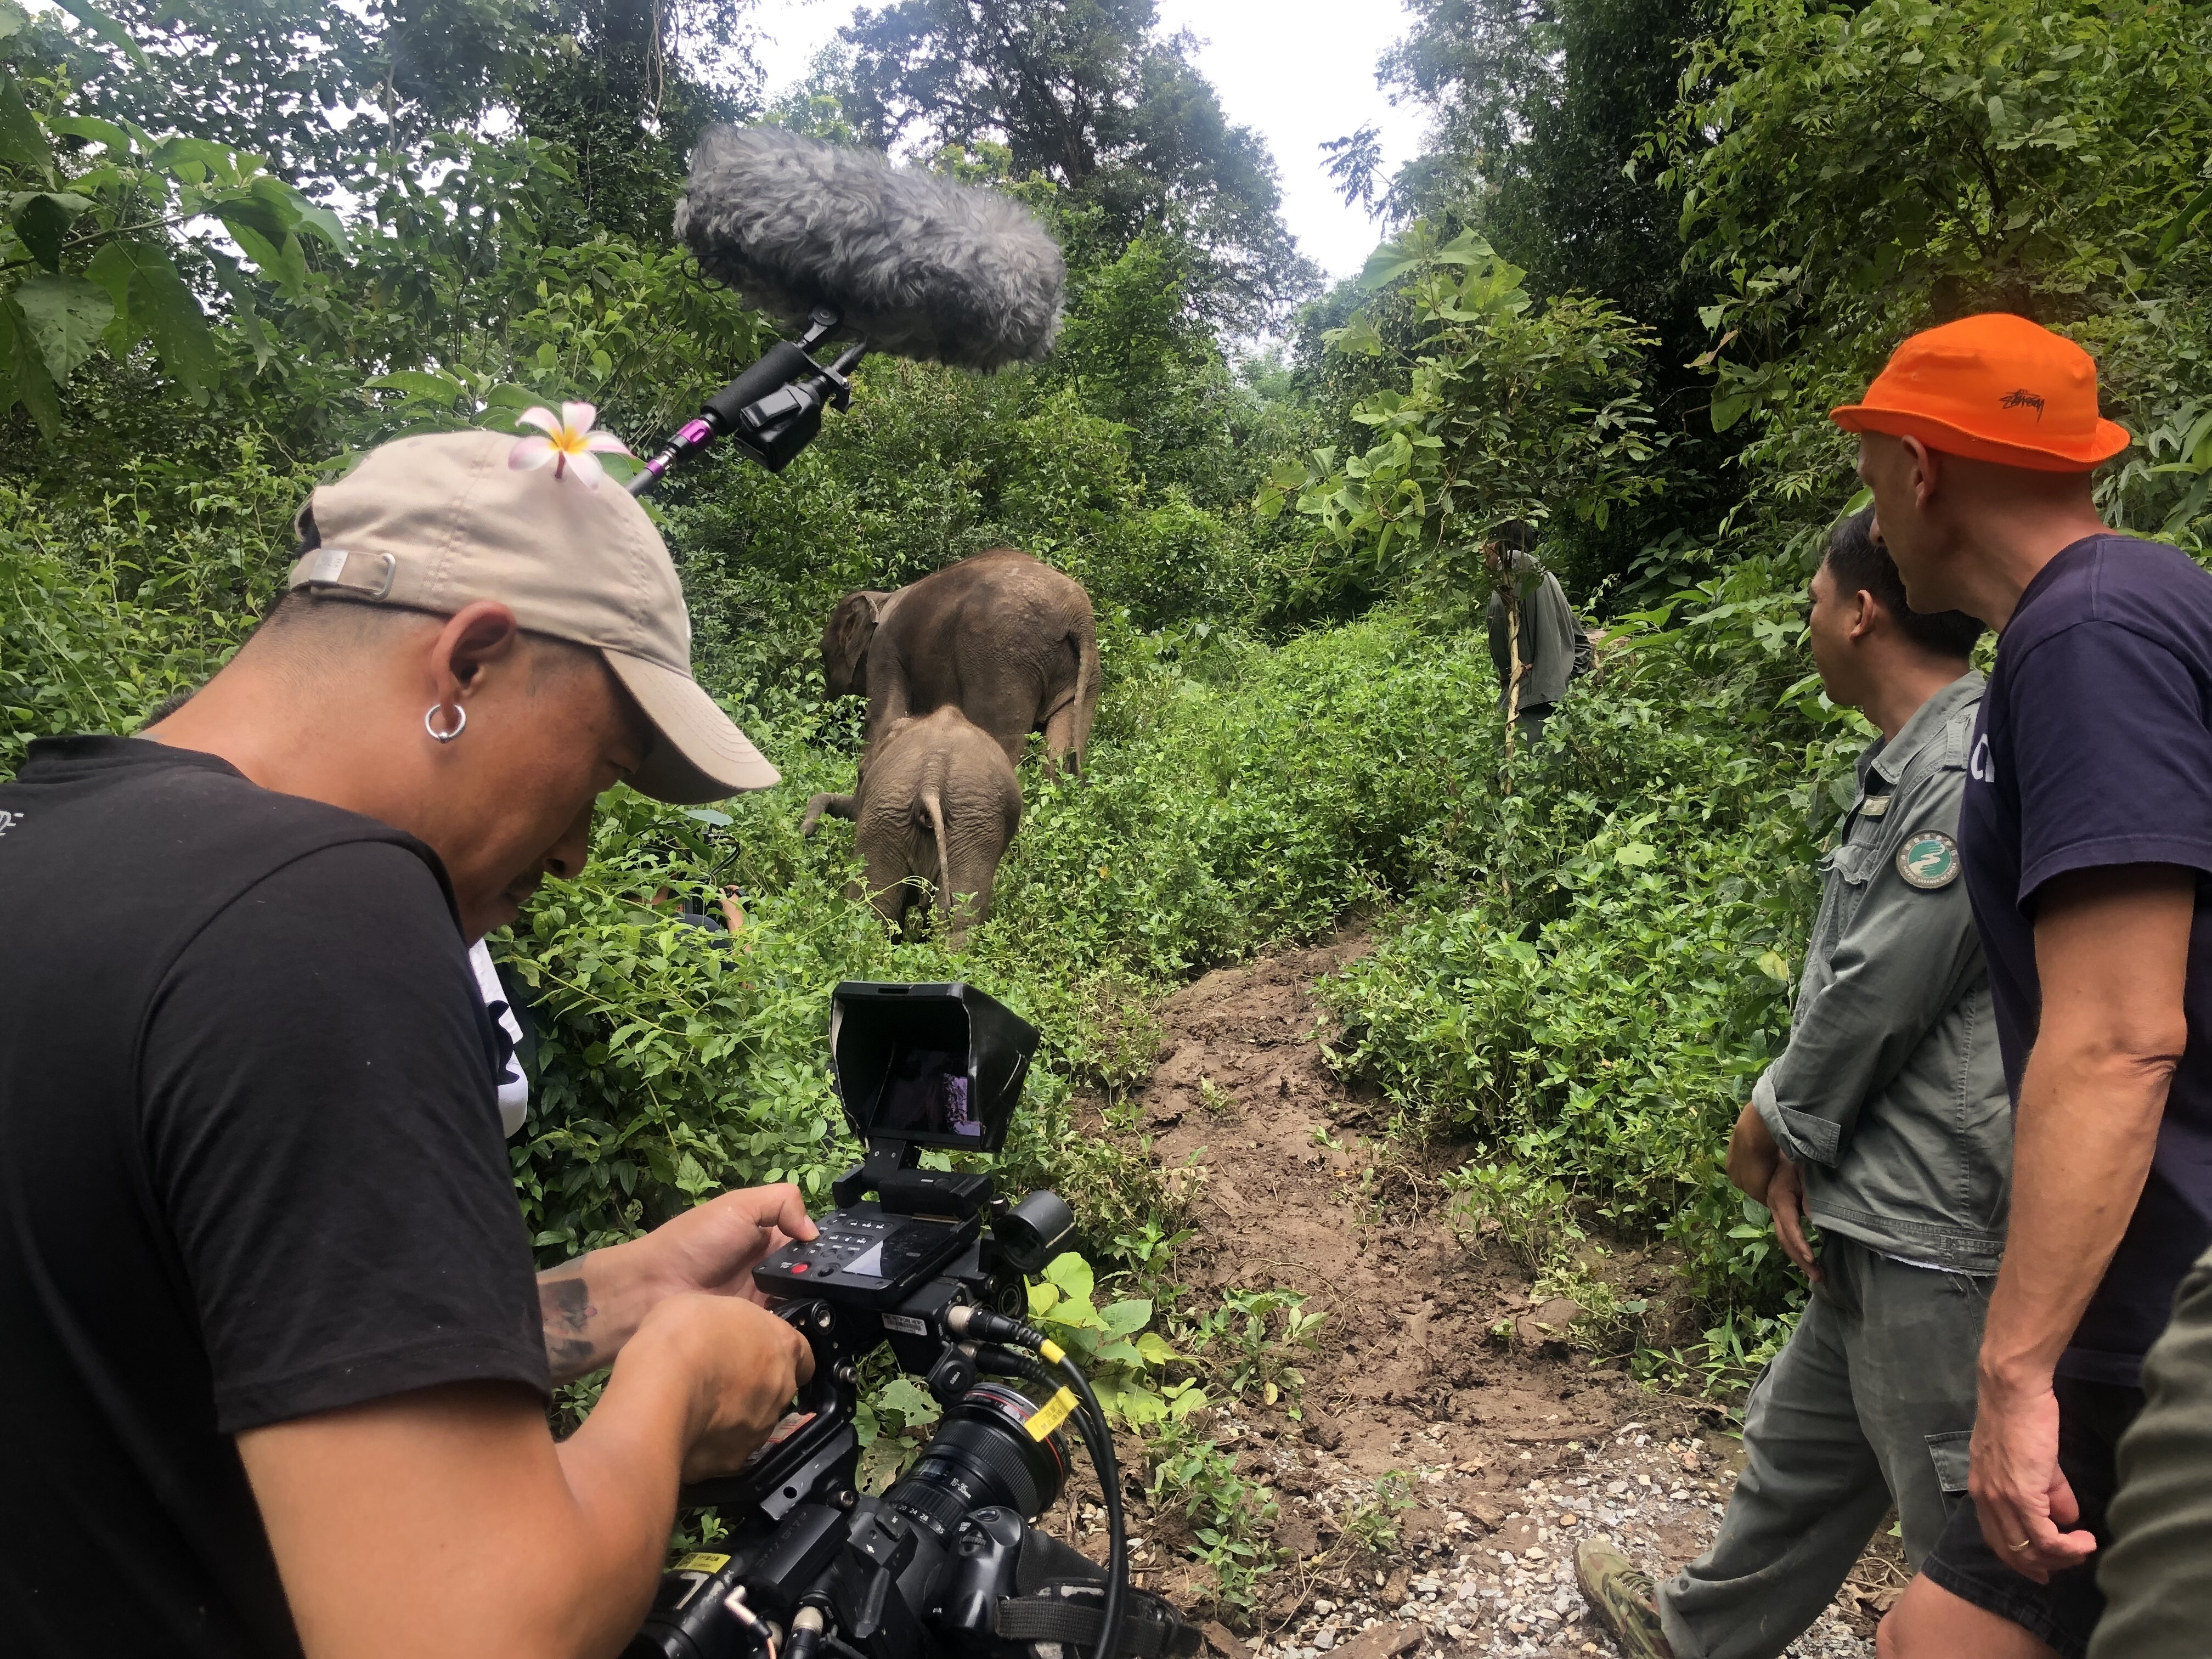 Dominic Johnson-Hill (right) with guide and a crew member filming in an elephant sanctuary in Yunnan for adventure documentary Seasons of China, during which he was kicked by an elephant calf. Photo: Dominic Johnson-Hill